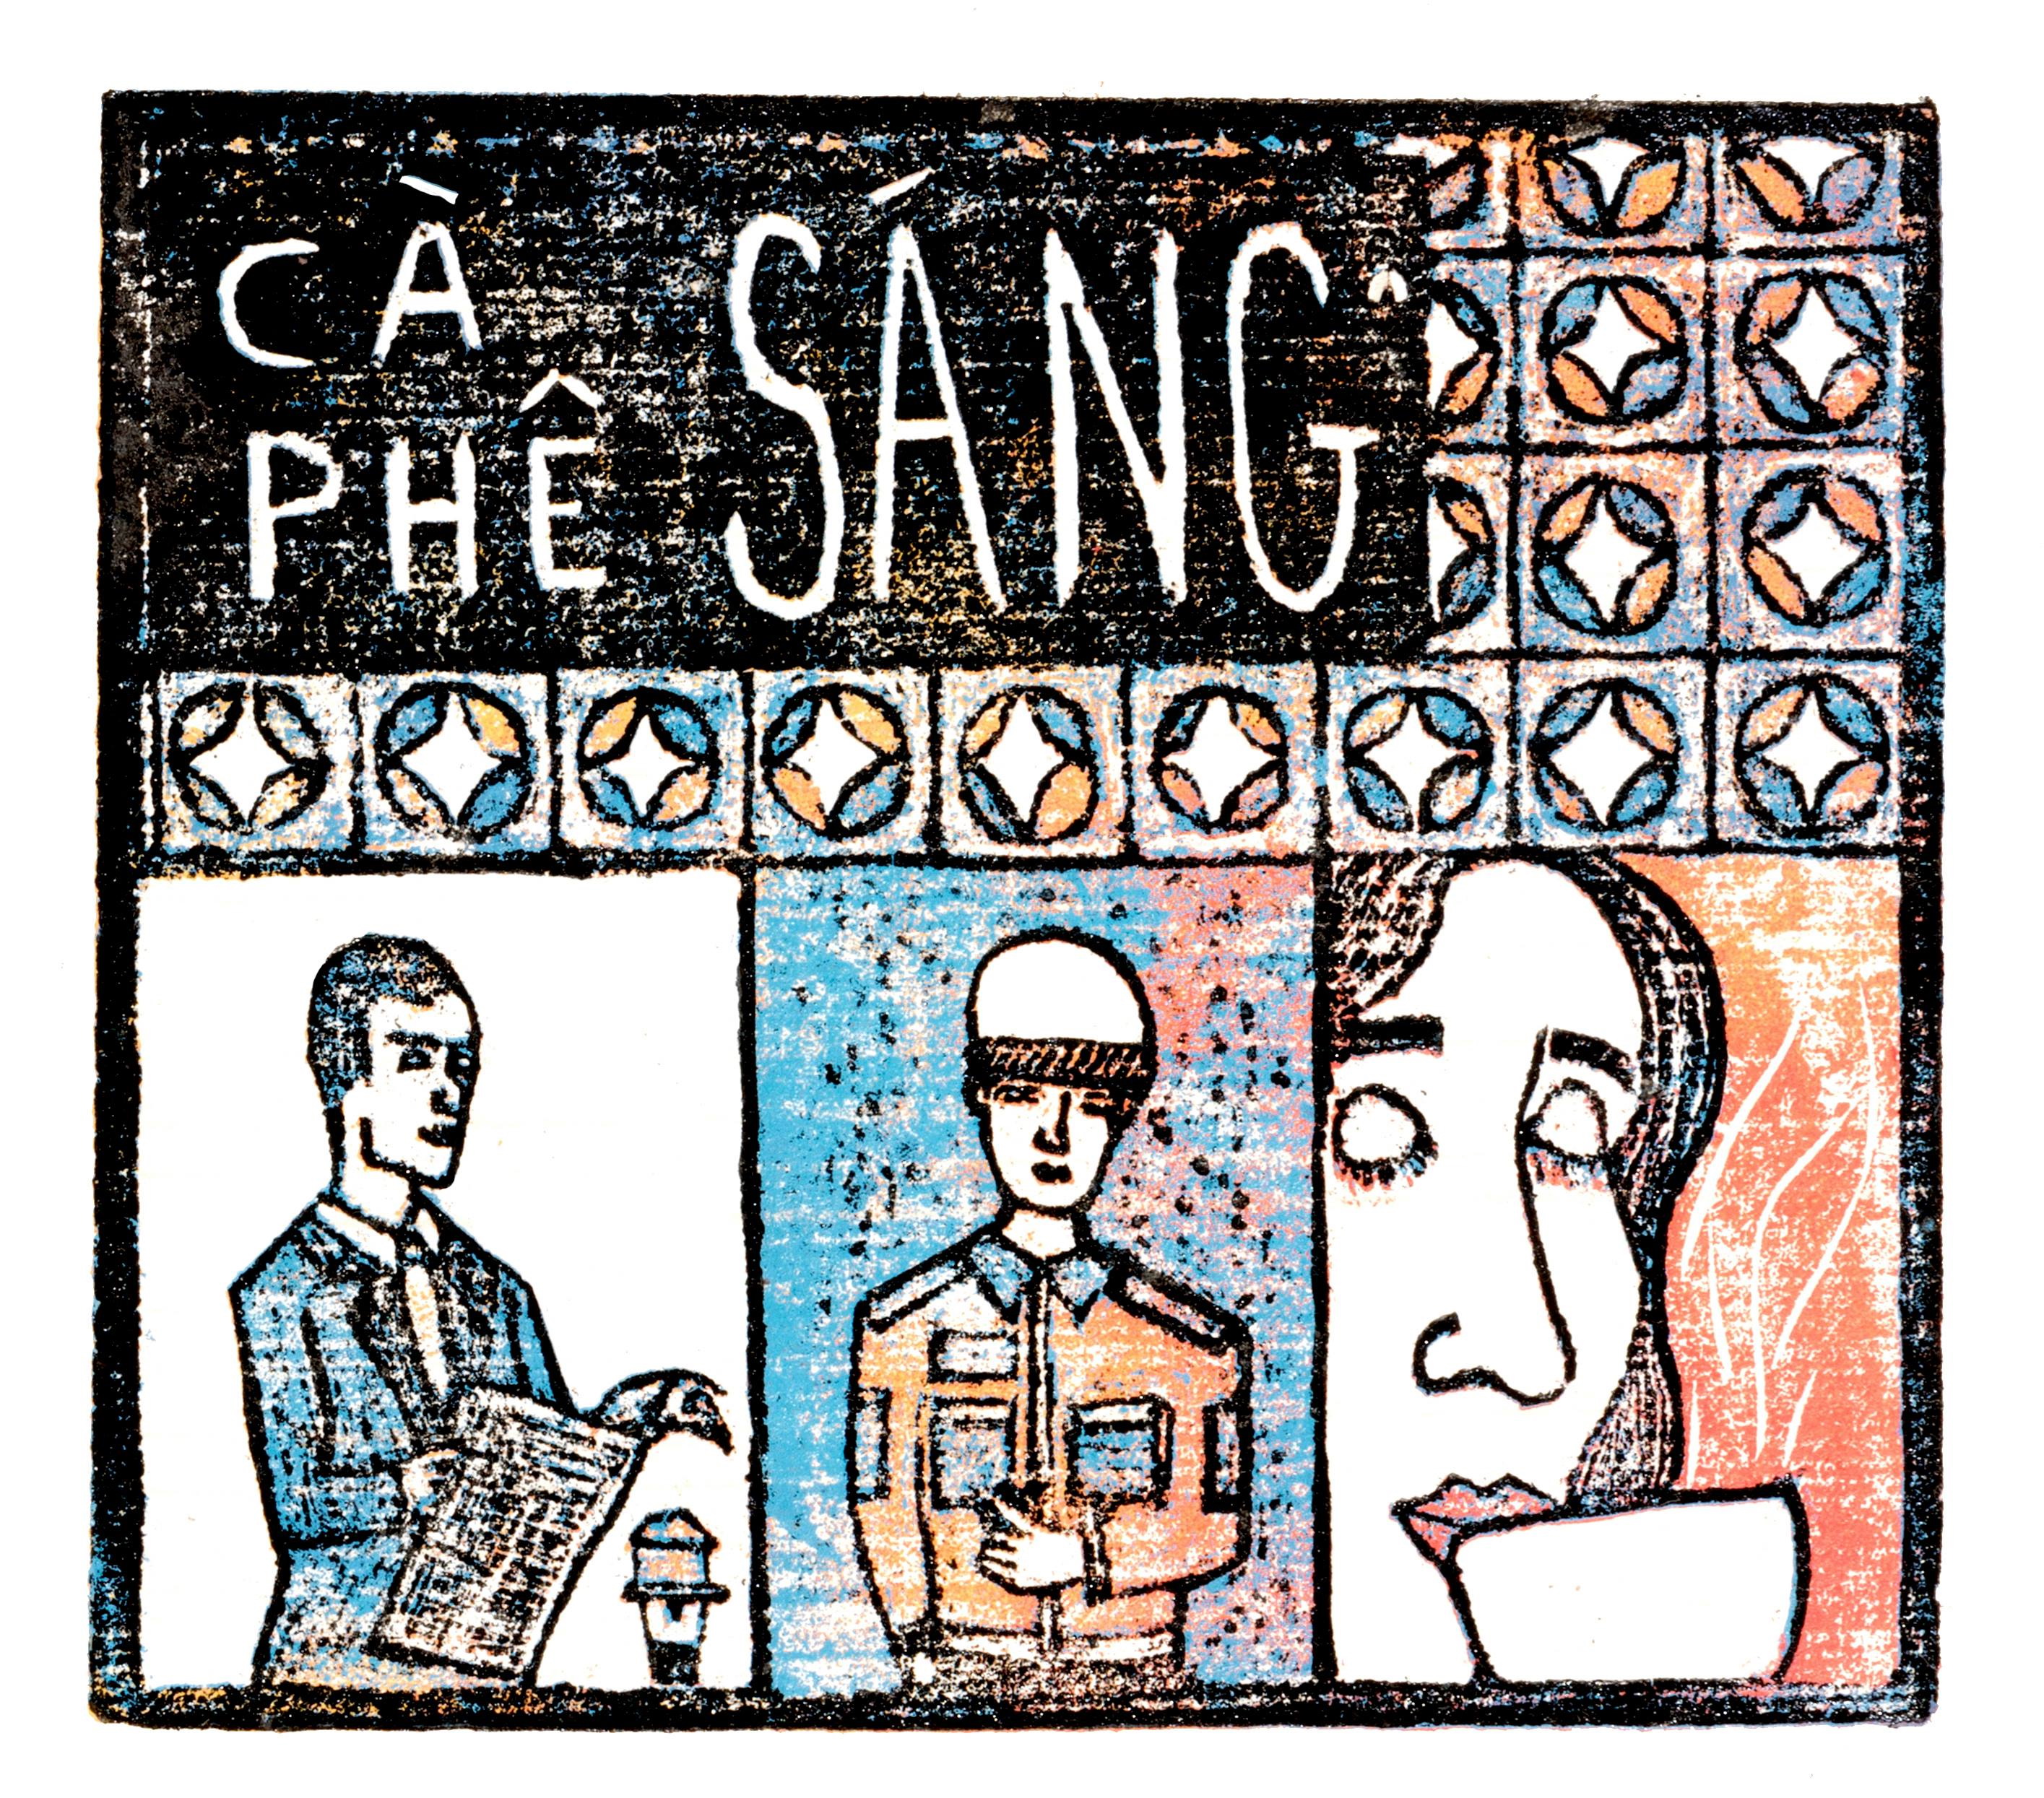 ‘Ca Phe Sang,’ a sample of work by Ho Chi Minh City based artists Jack Clayton. Photo: Supplied by the artist.